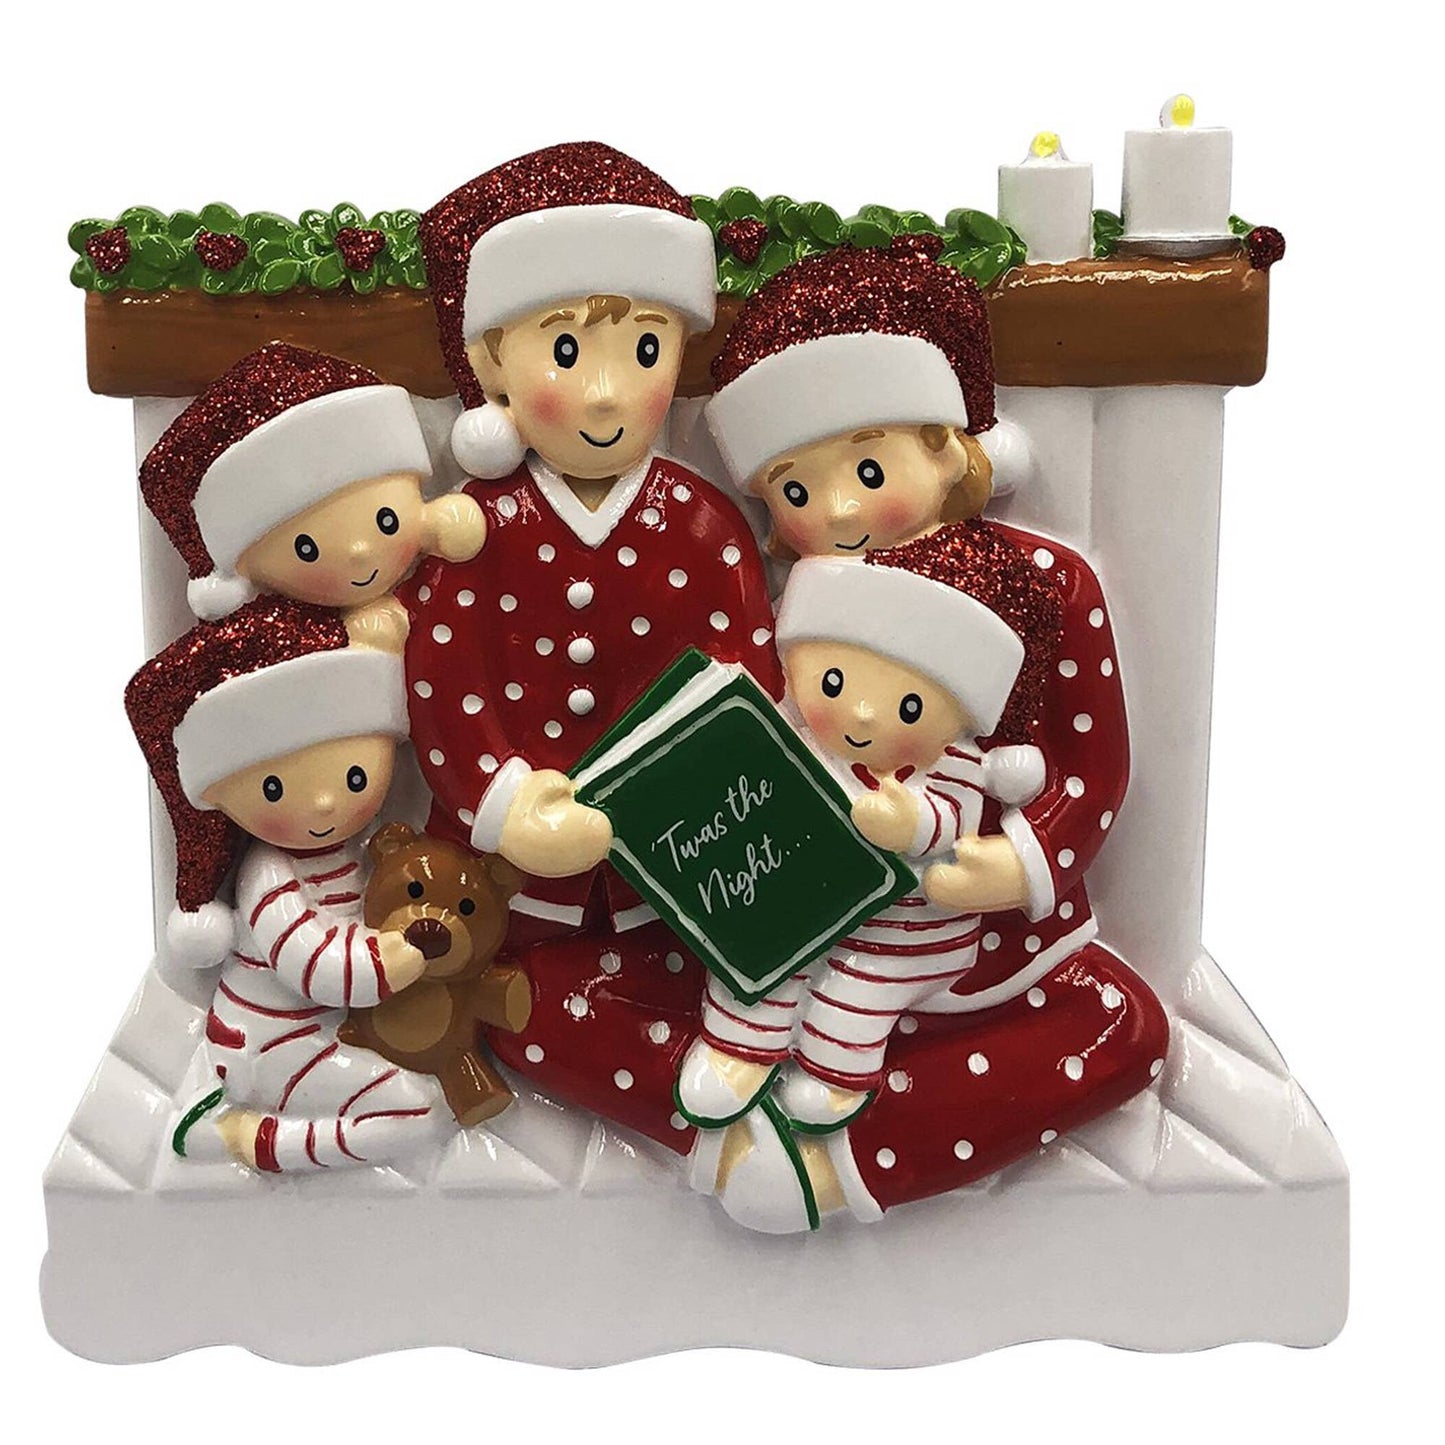 Reading In Bed 5 Family Personalized Christmas Ornament